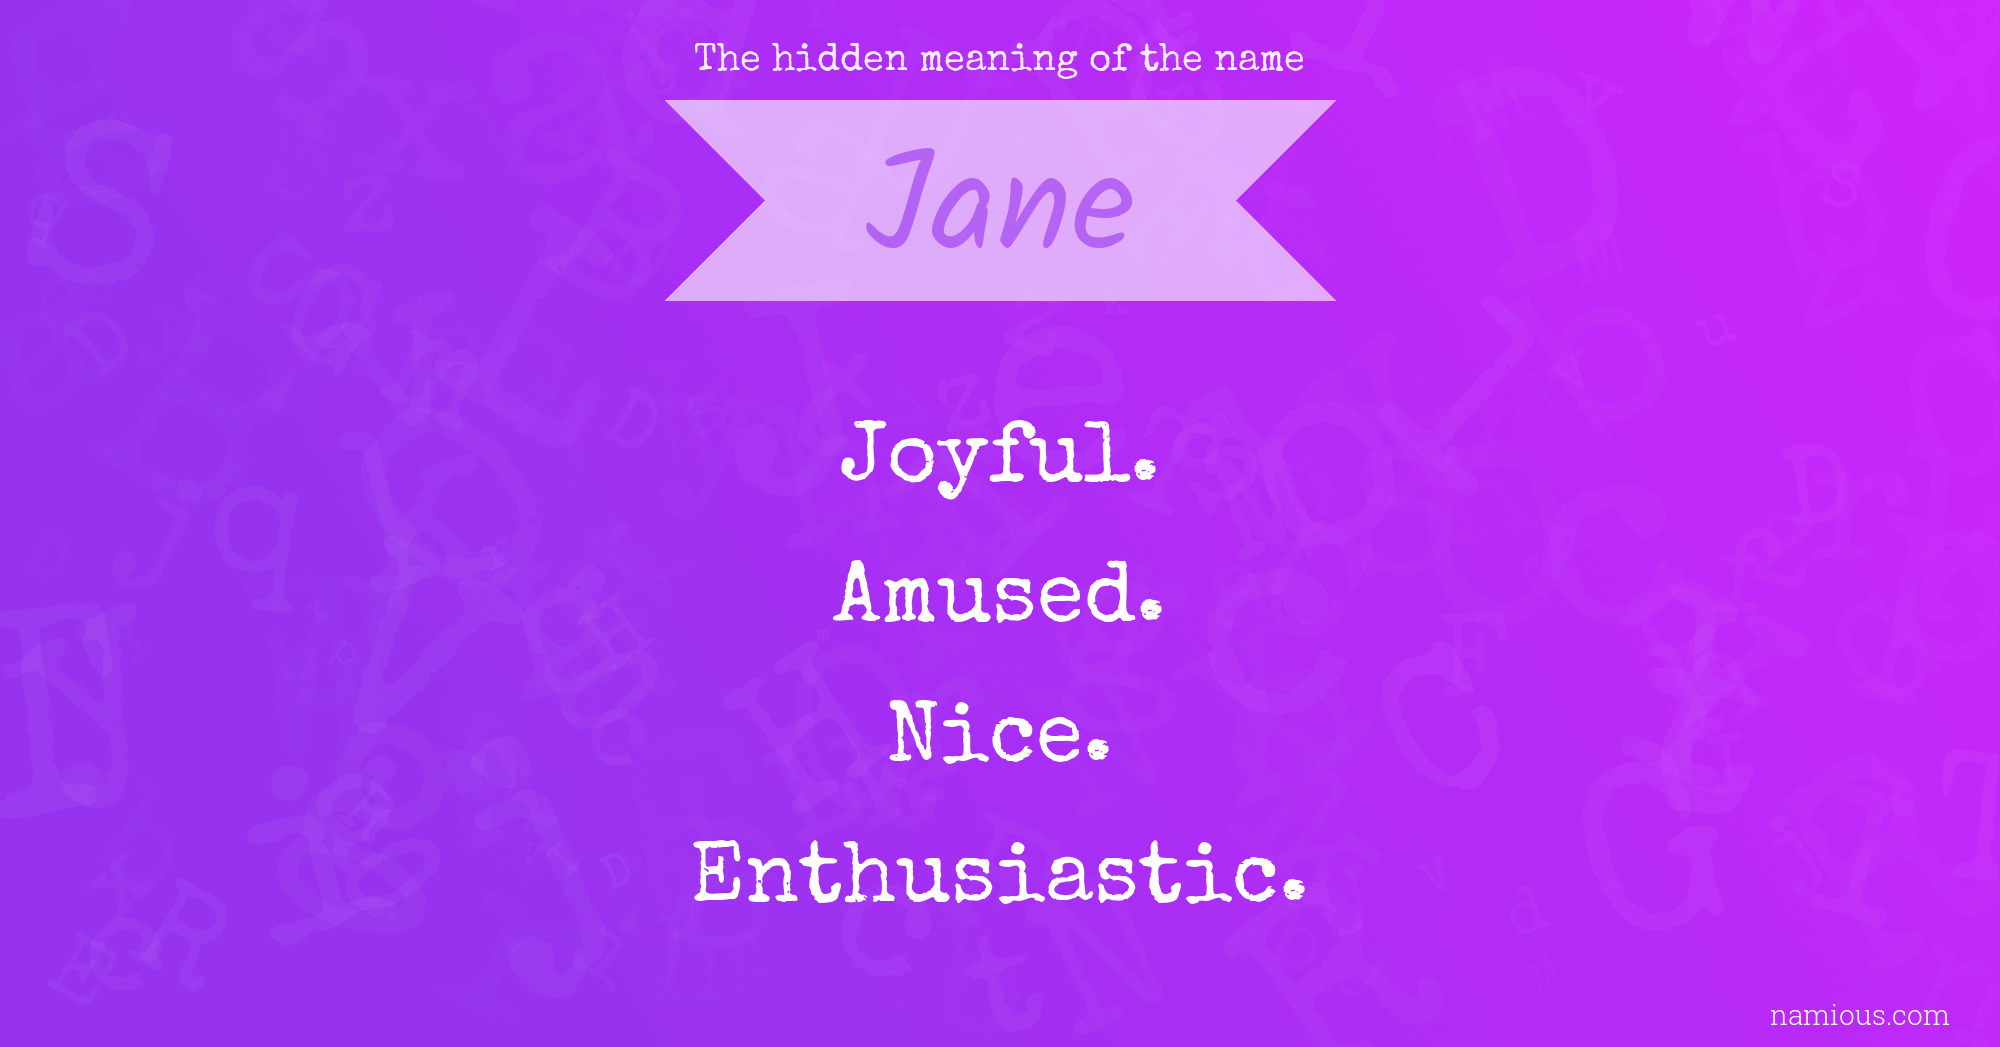 The hidden meaning of the name Jane